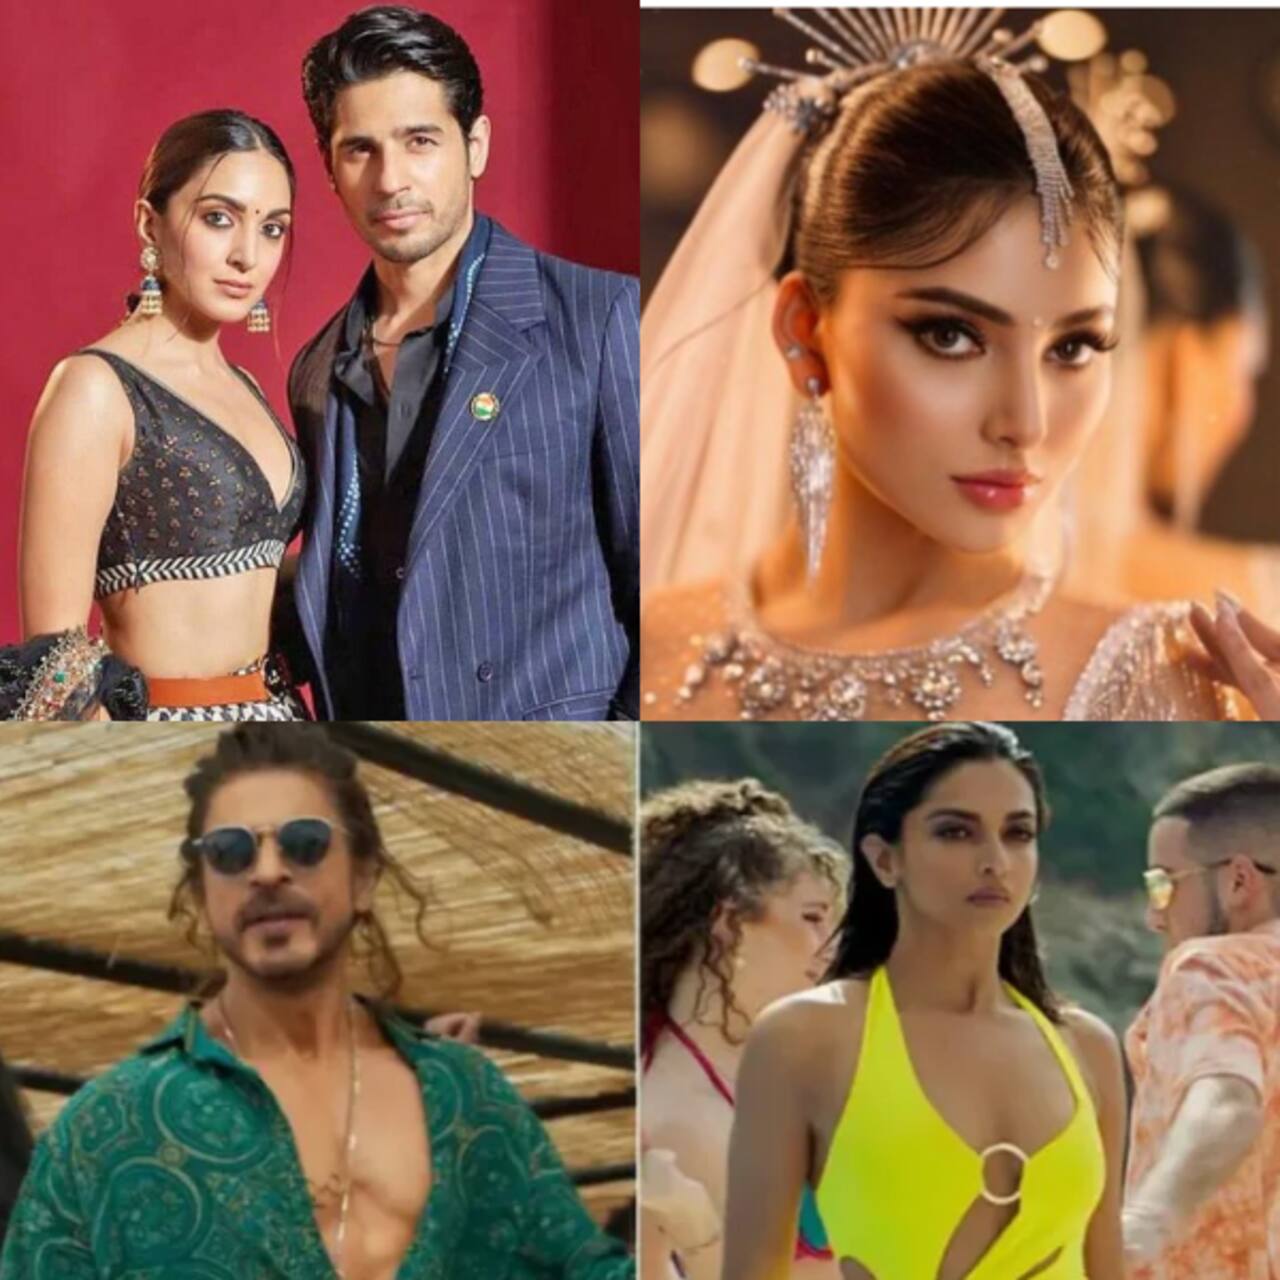 Trending Entertainment News Today: Sidharth Malhotra-Kiara Advani to tie knot soon, Urvashi Rautela drops cryptic post after Rishabh Pant's accident and more 